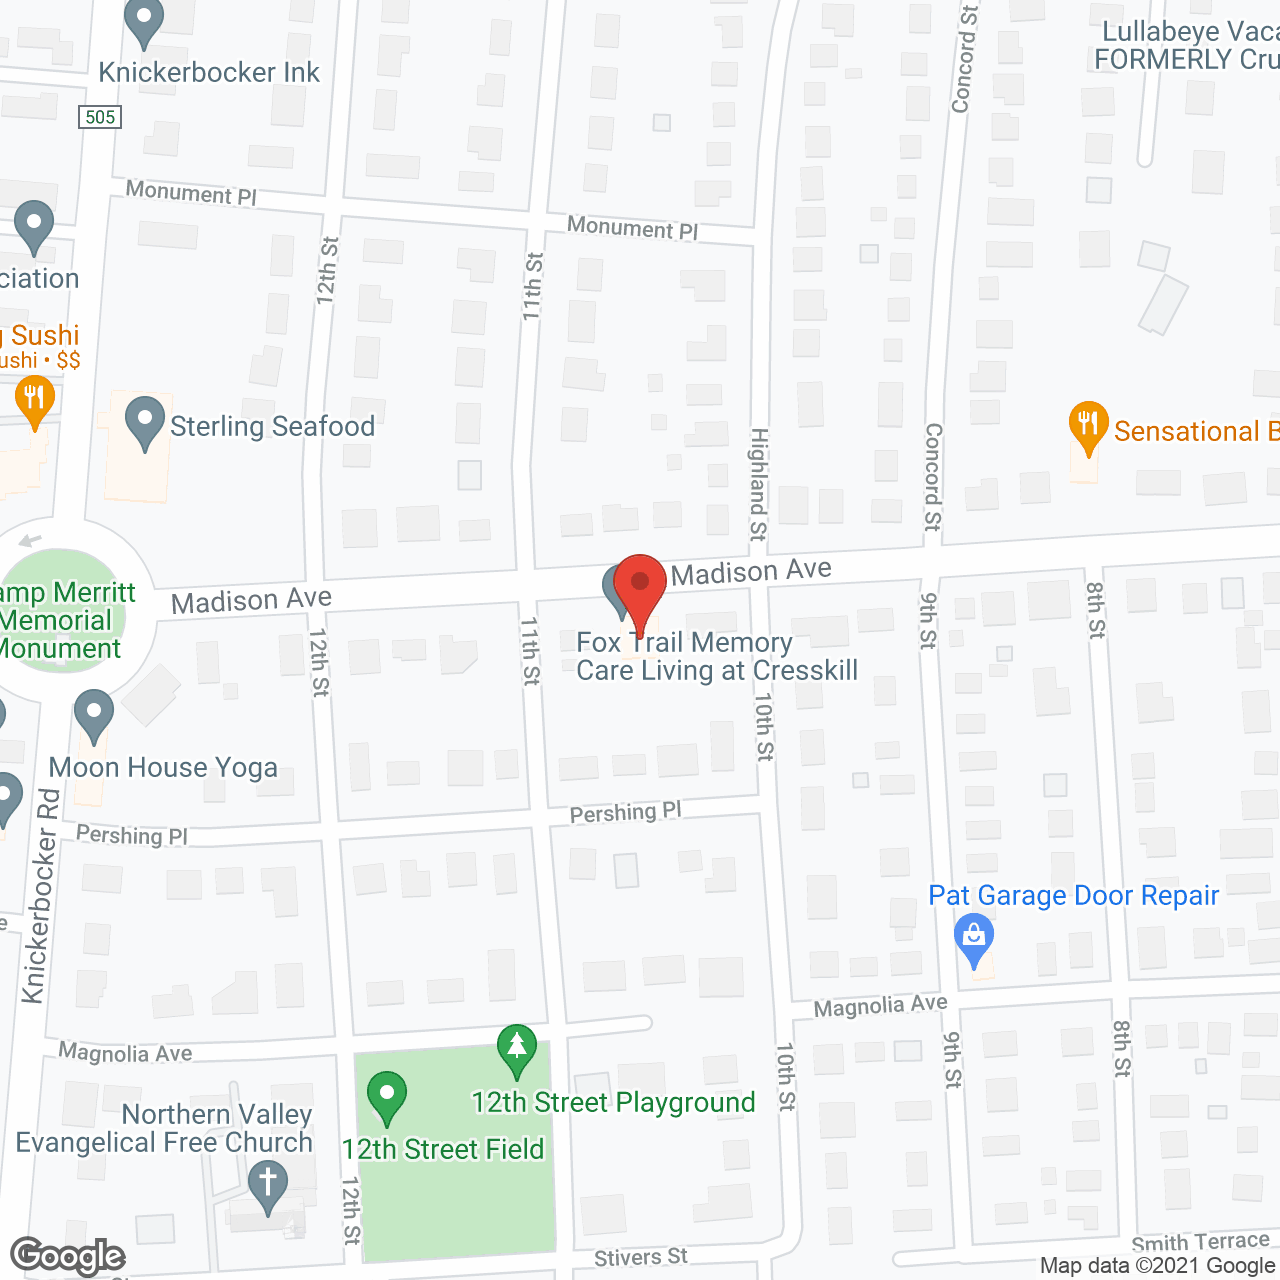 Fox Trail Memory Care Living at Cresskill in google map